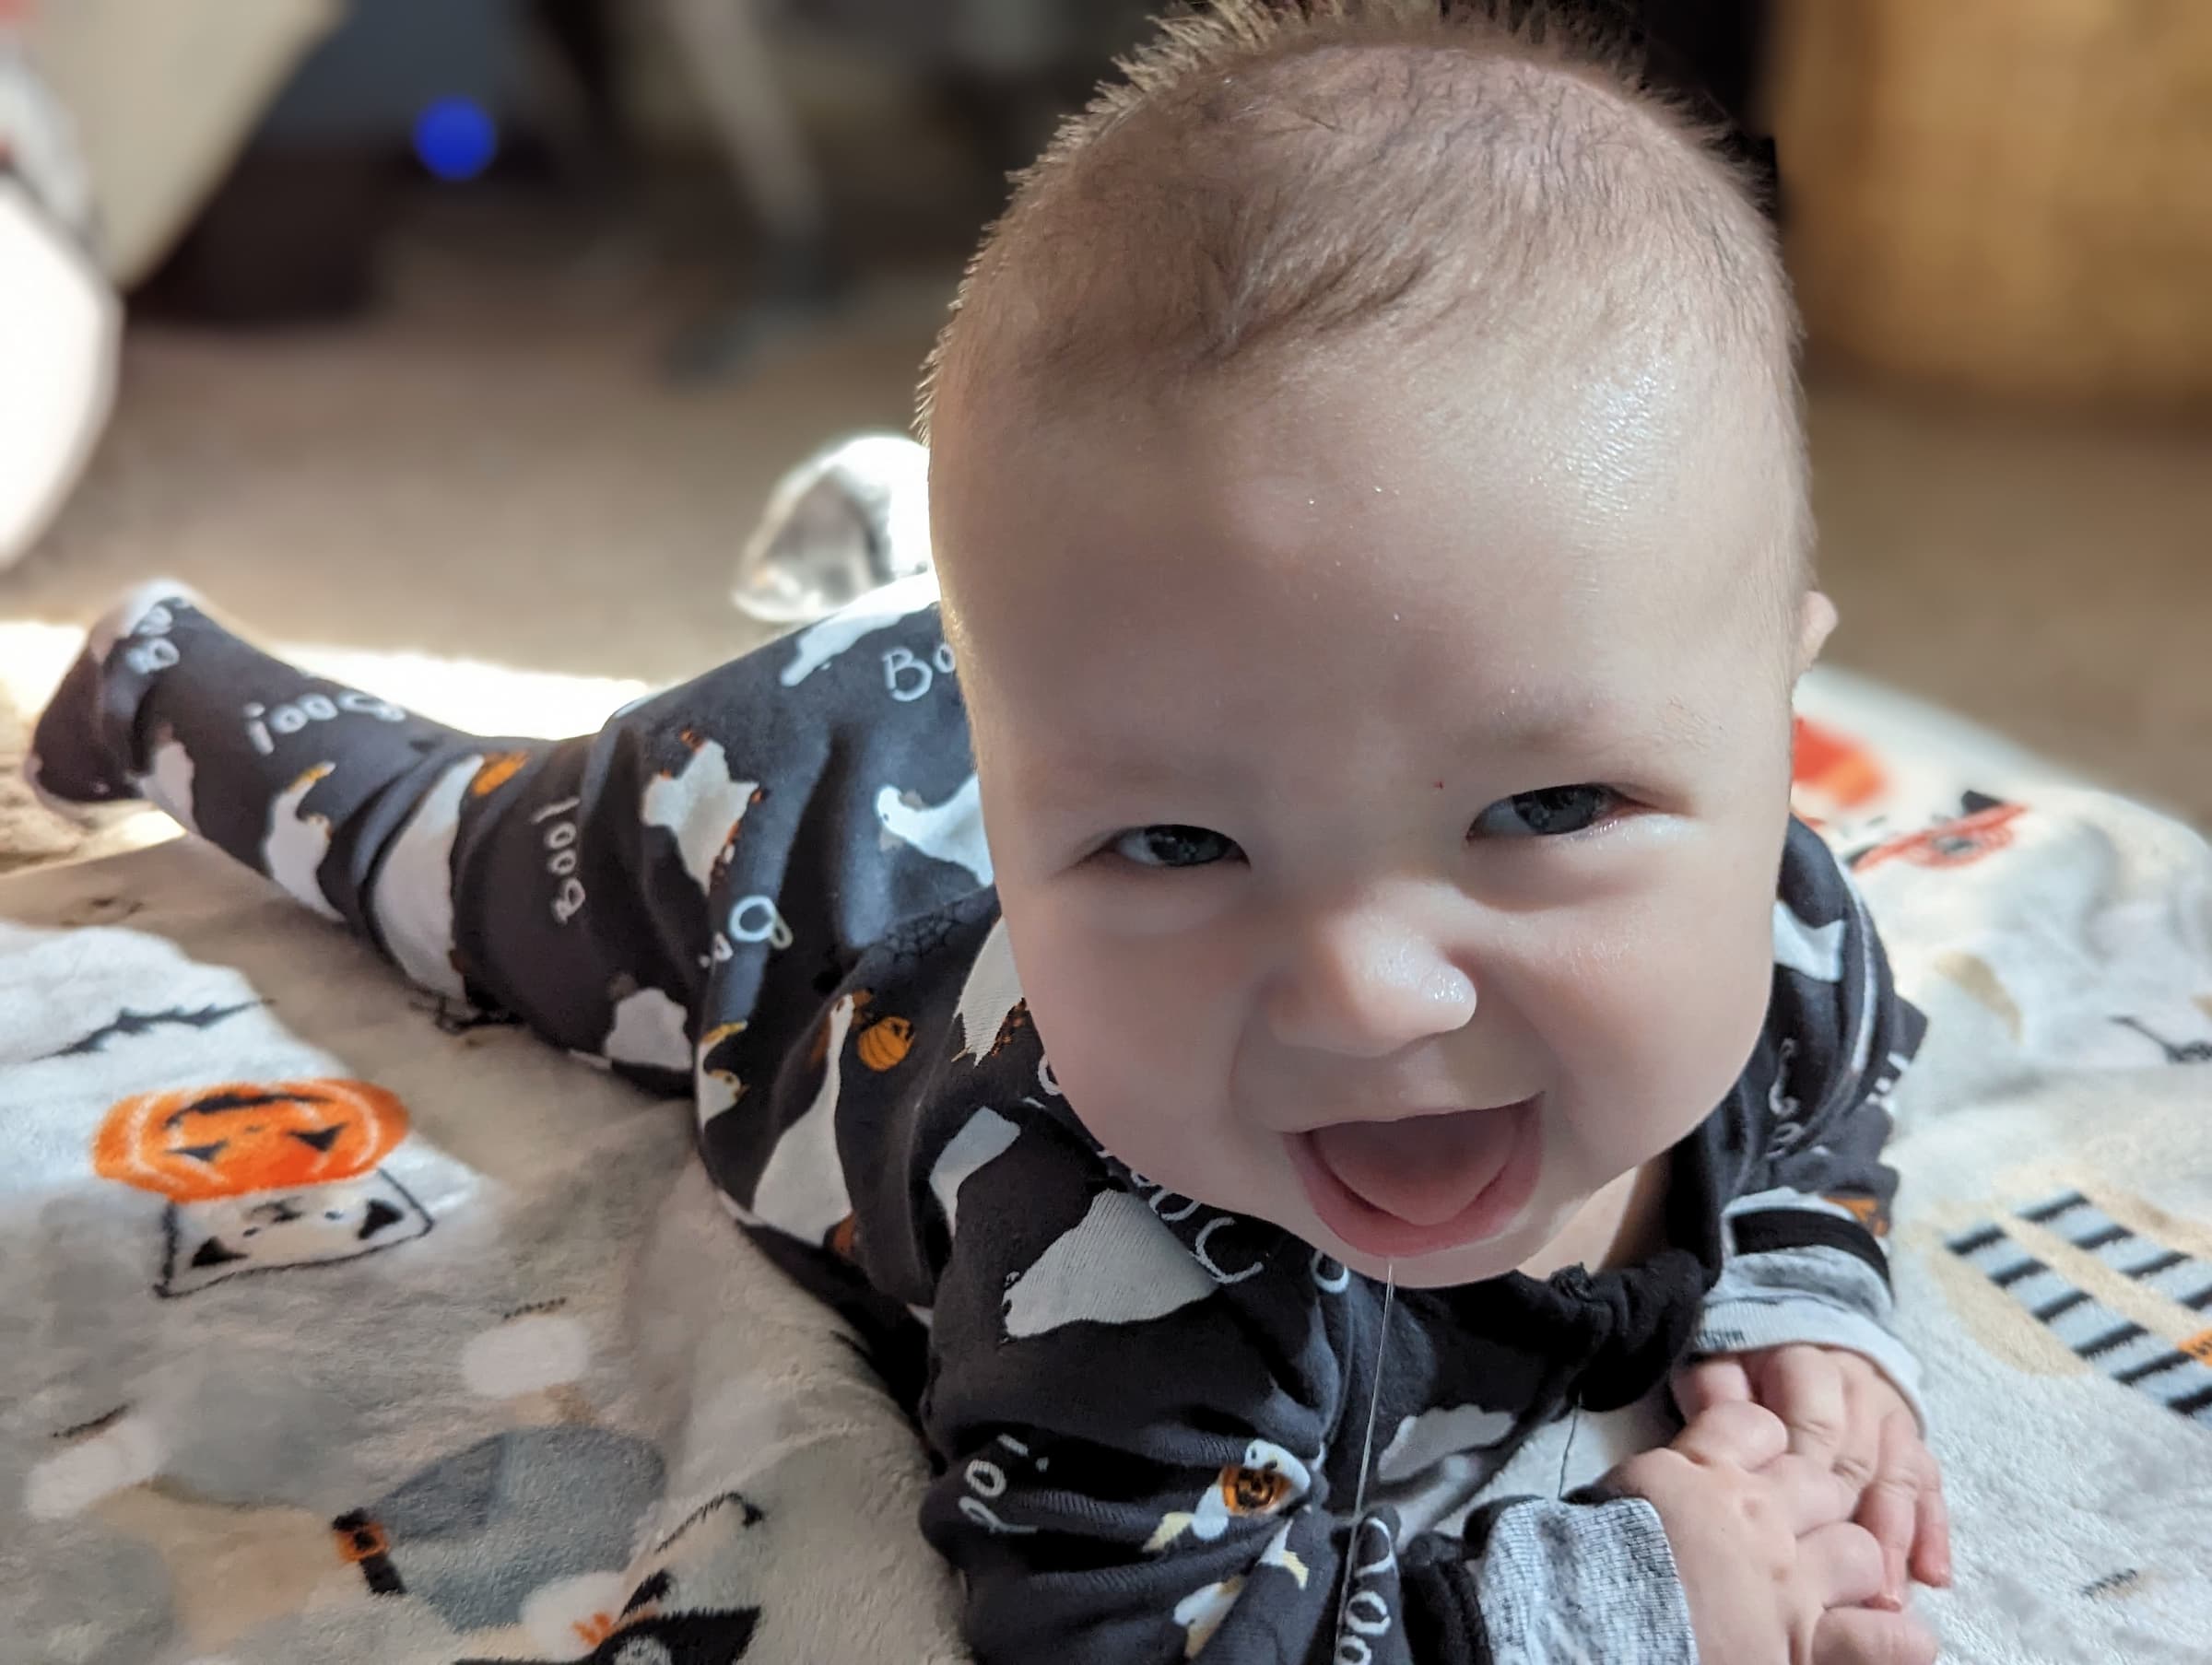 A baby wearing black pajamas, with dogs dressed as ghosts on it, looking at the camera with a goofy grin.